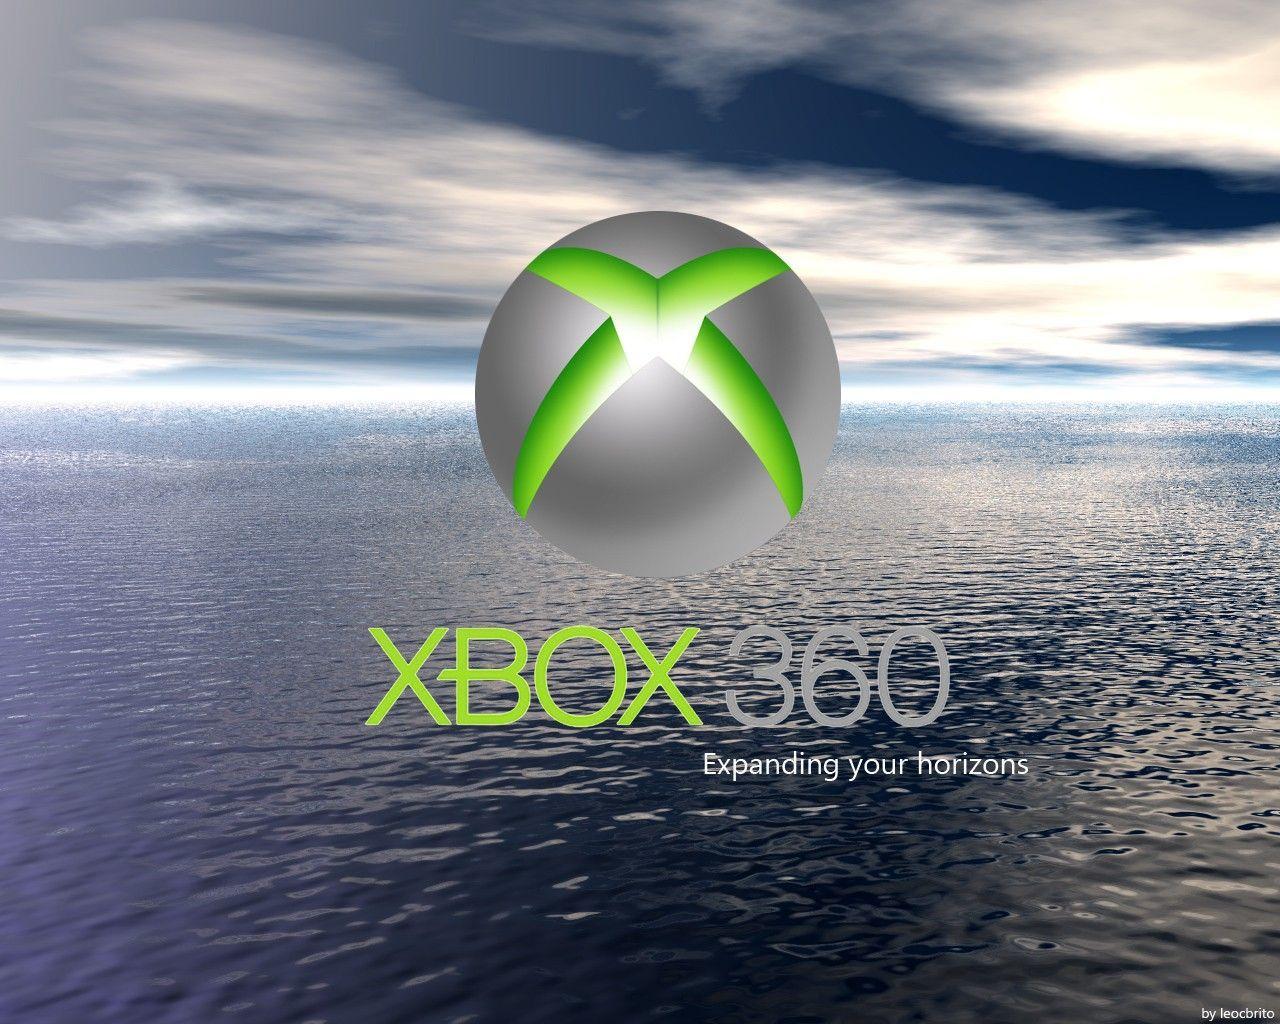 Xbox Logo Wallpapers Hdlogo Car Wallpapers All Xbox Logos The Best